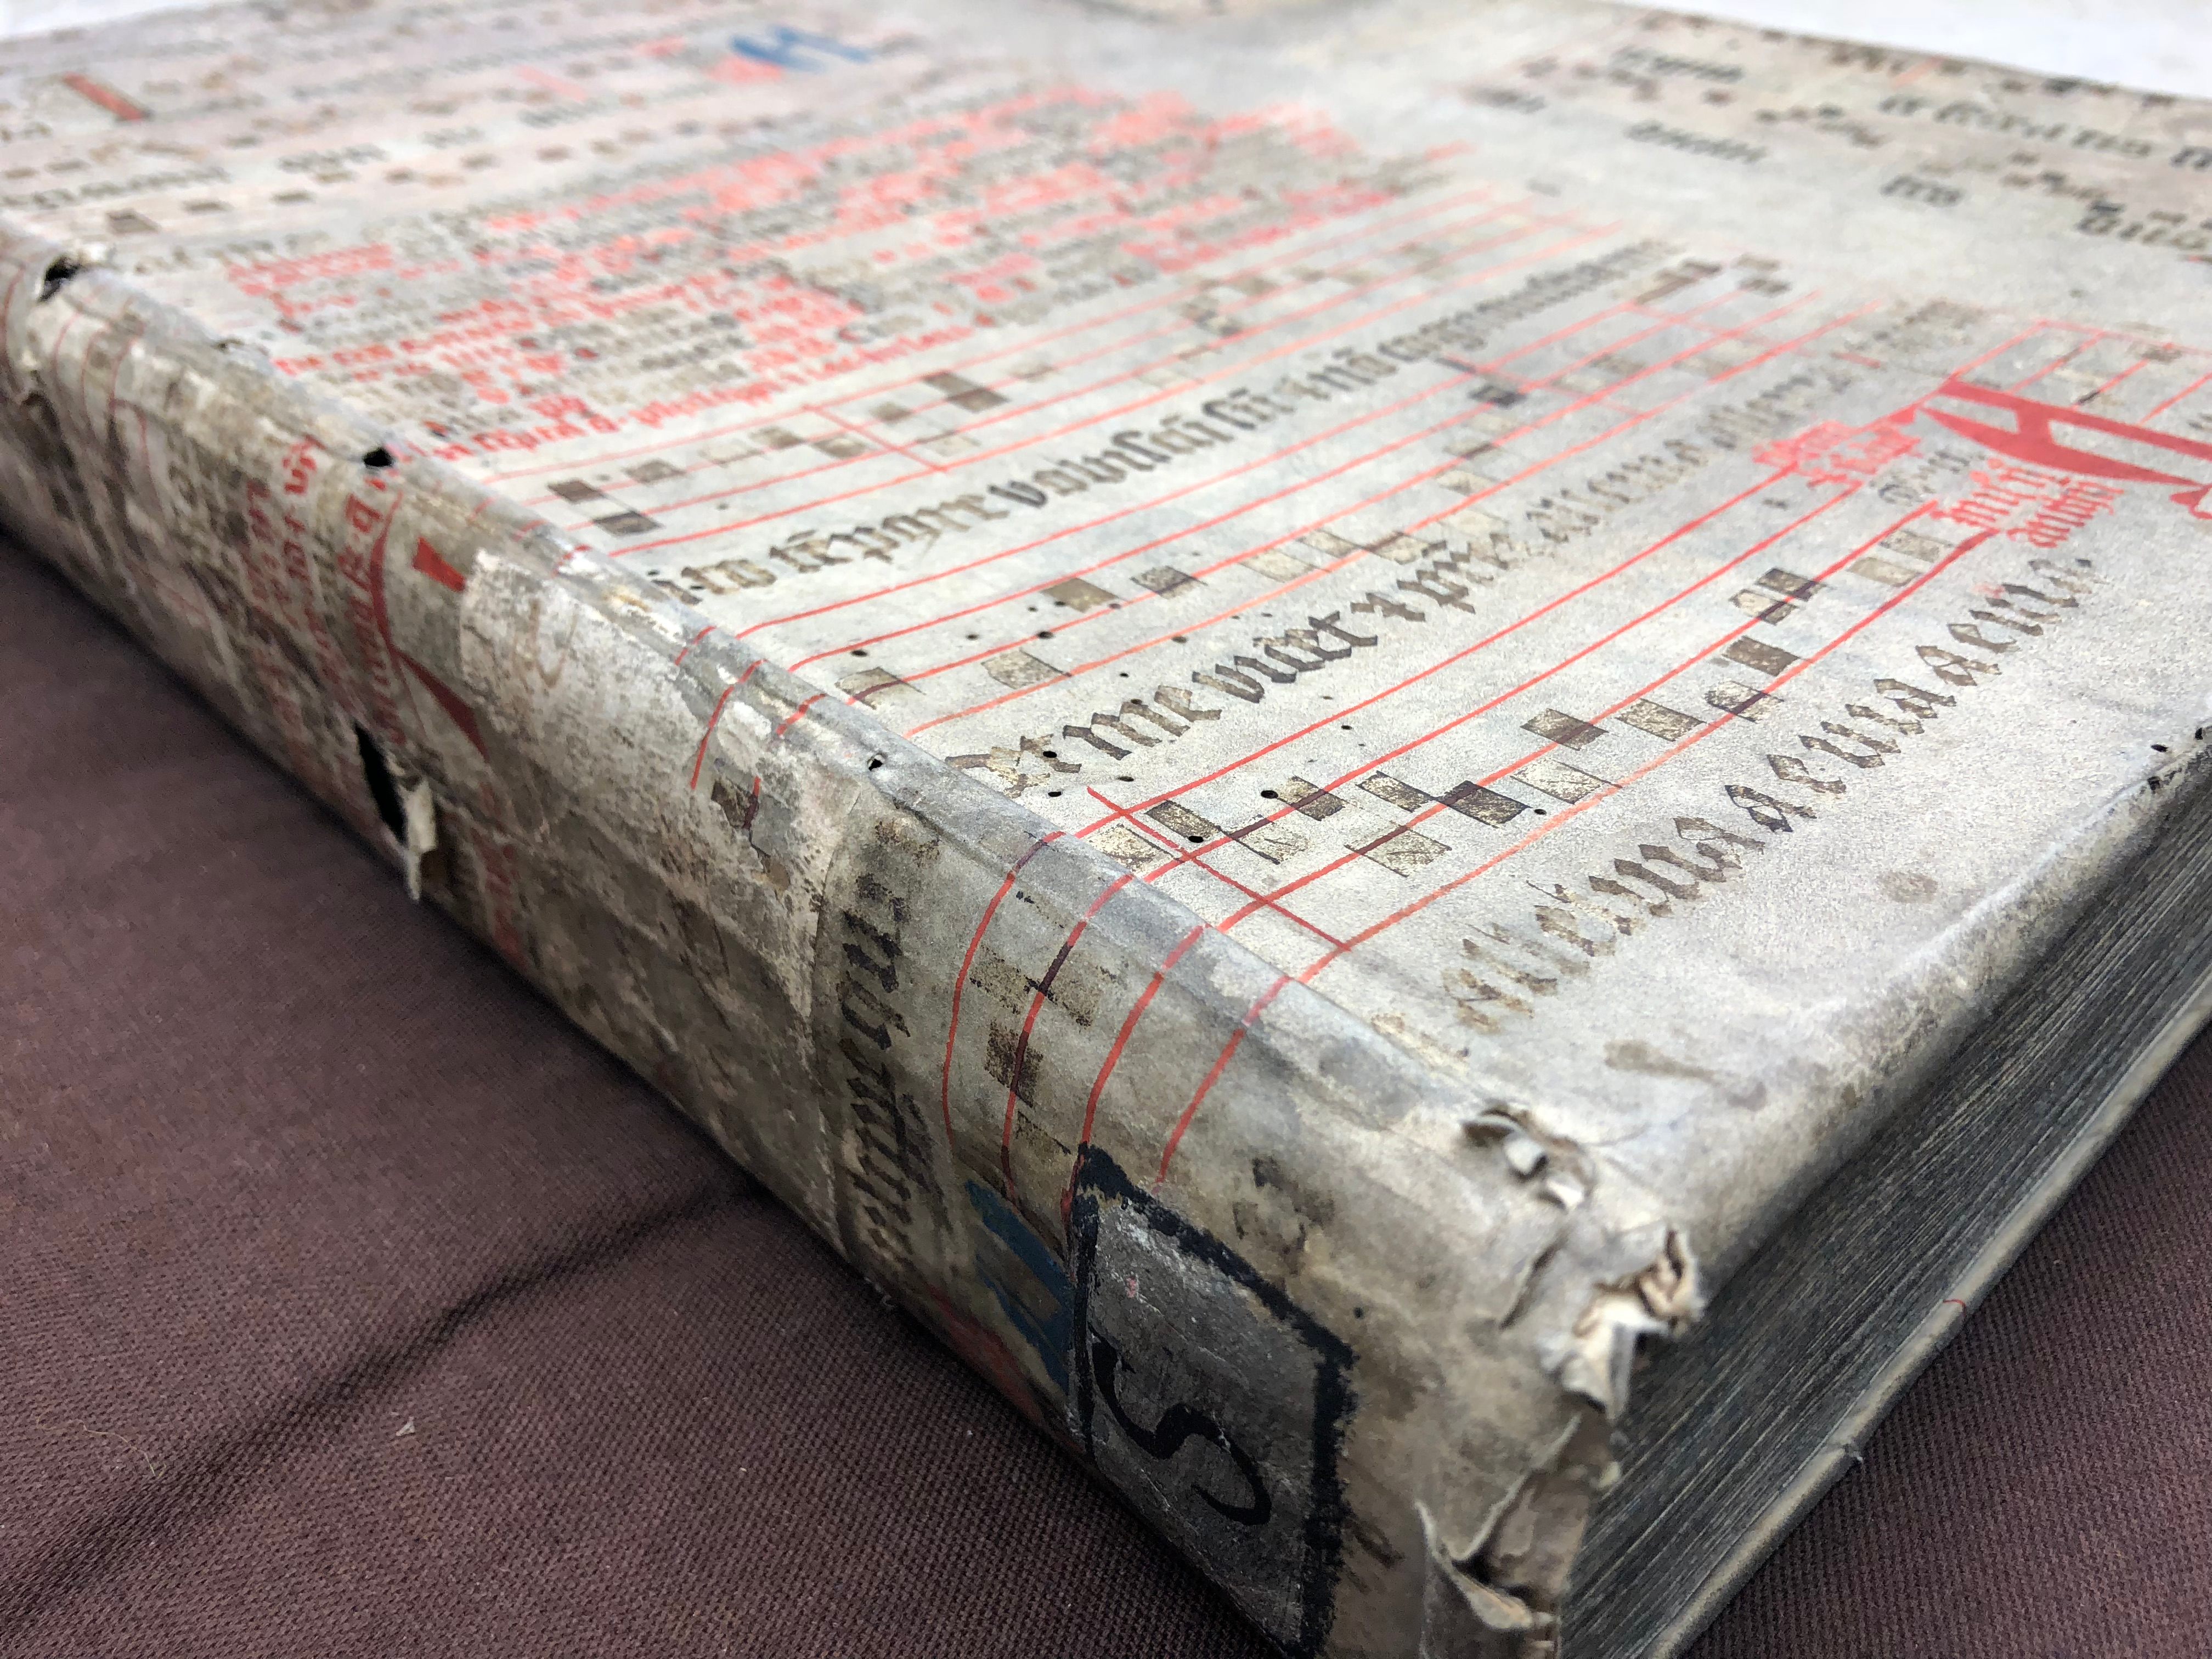 The Surprising Practice of Binding Old Books With Scraps of Even